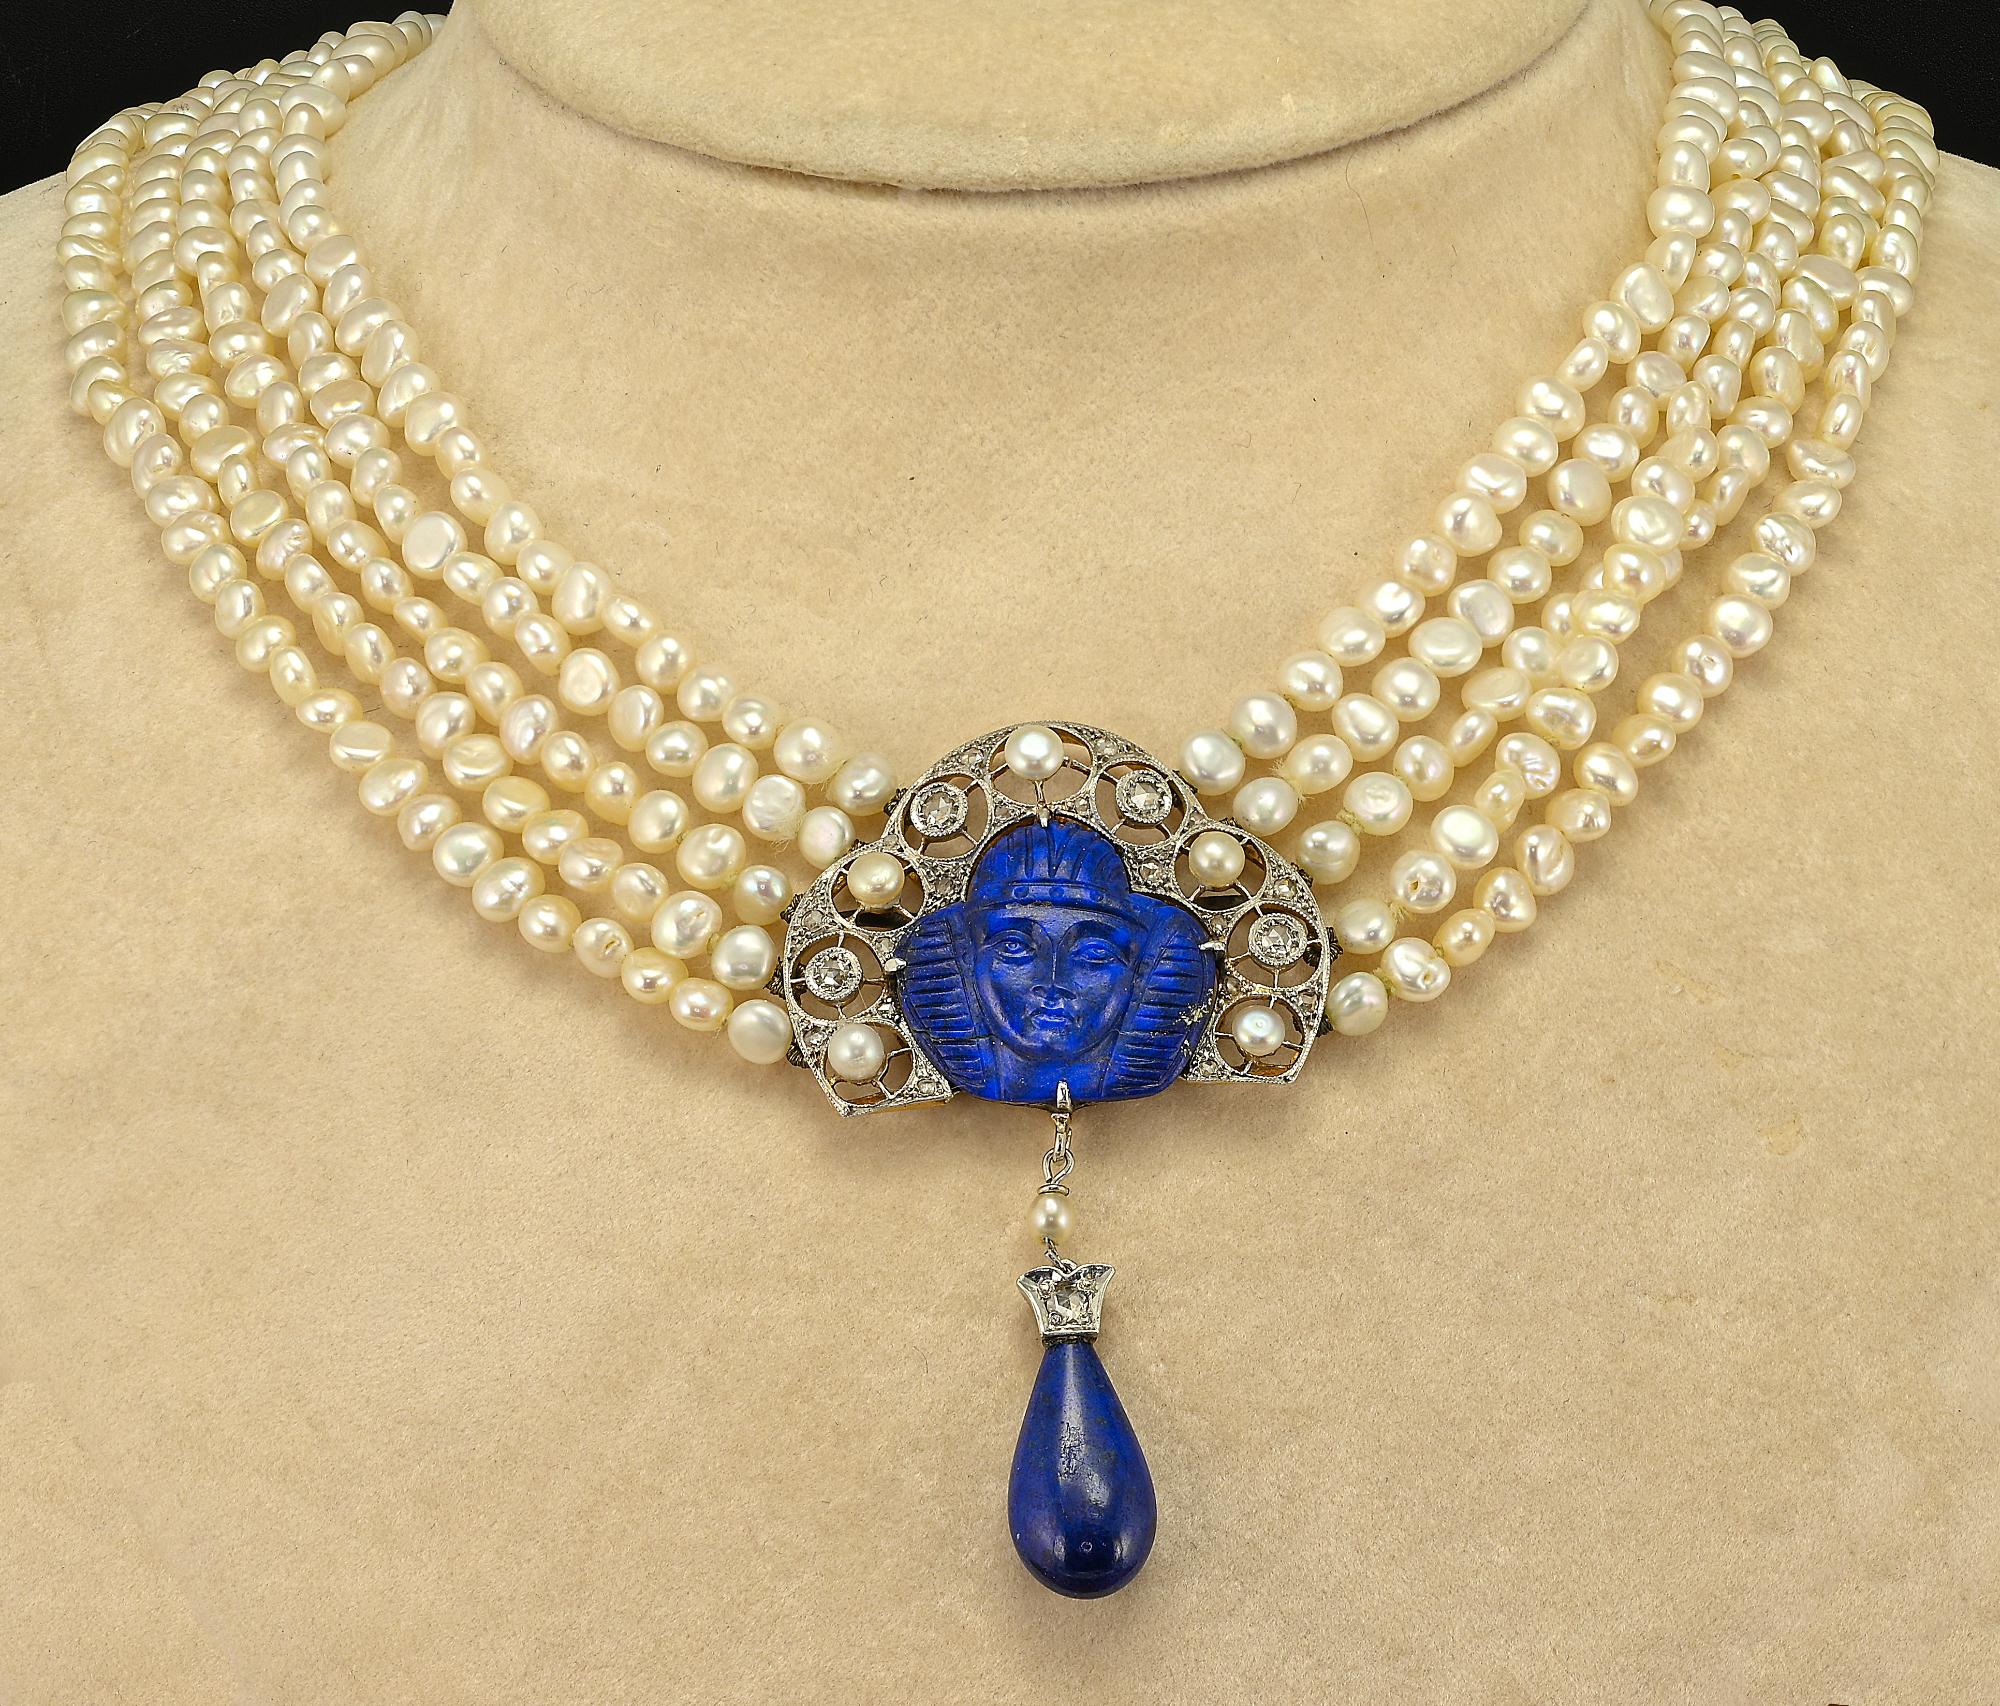 Unique Art Deco Egyptian Revival necklace, 1920 circa

Comprising a skillfully natural Lapis hand carved centerpiece featuring an Egyptian Pharaoh, magnificent open work made of solid 18 KT gold platinum topped adorned with natural Pearls and rose